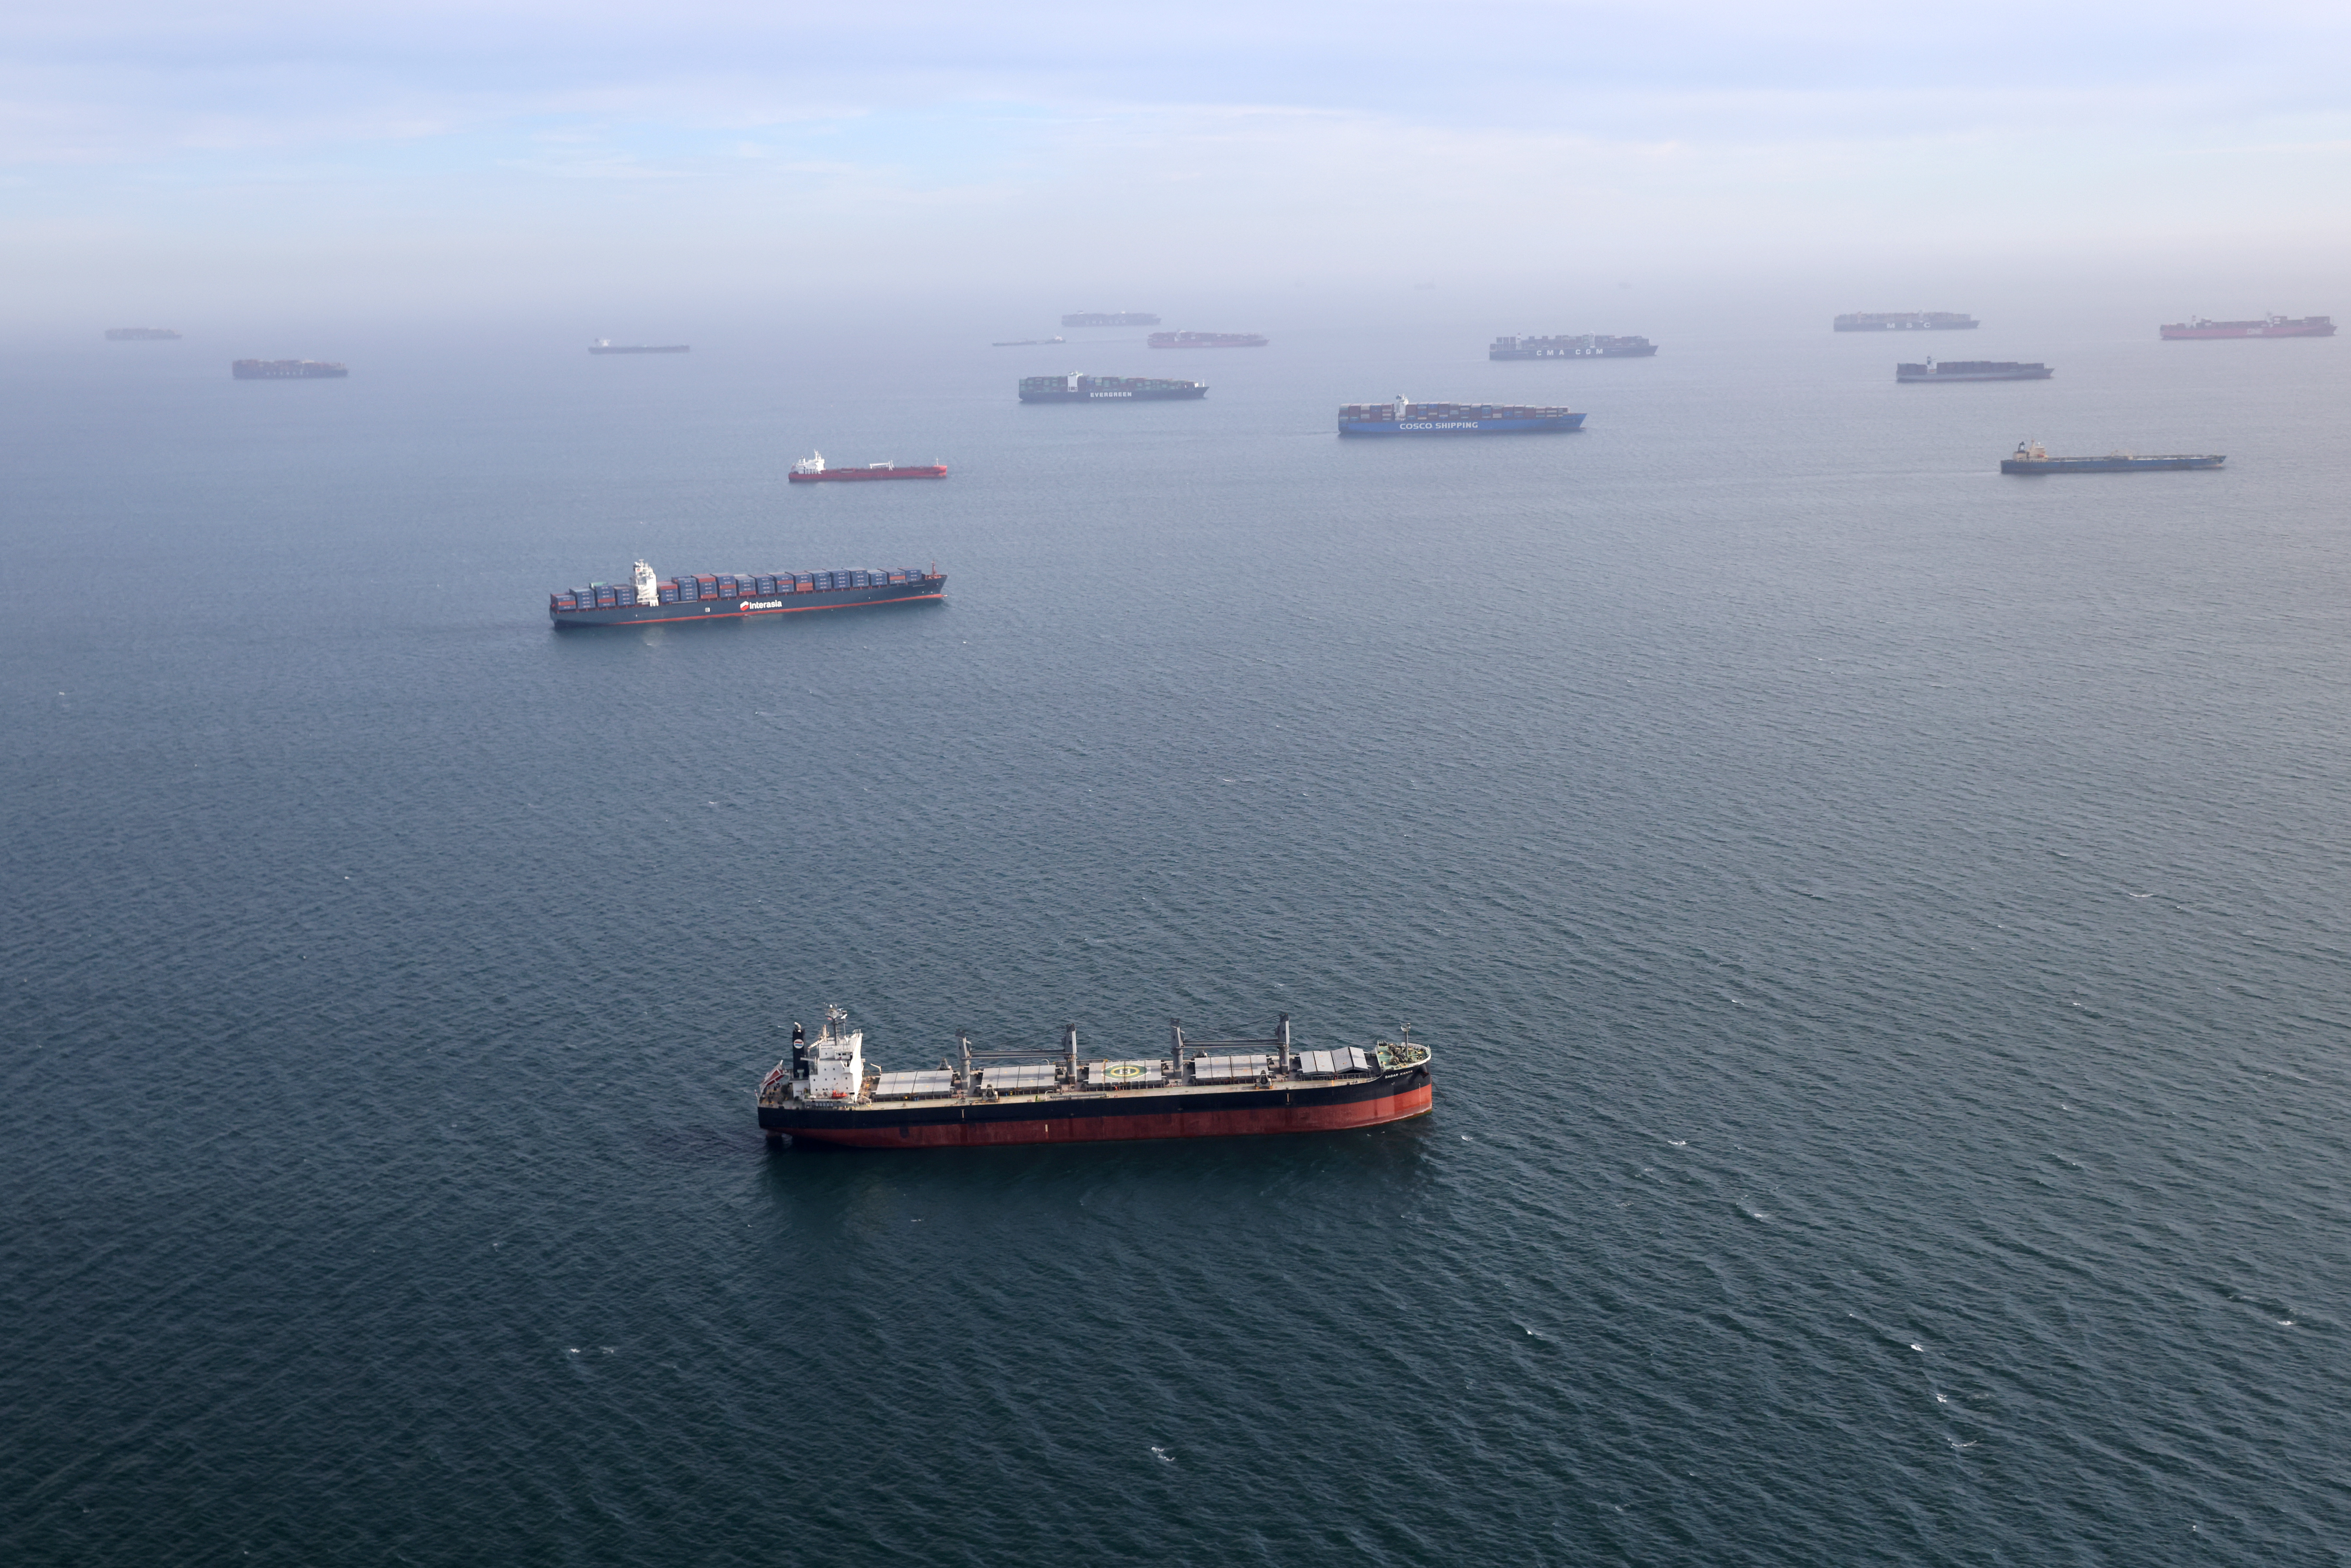 Container ships and oil tankers wait in the ocean outside the Port of Long Beach-Port of Los Angeles complex, amid the coronavirus disease (COVID-19) pandemic, in Los Angeles